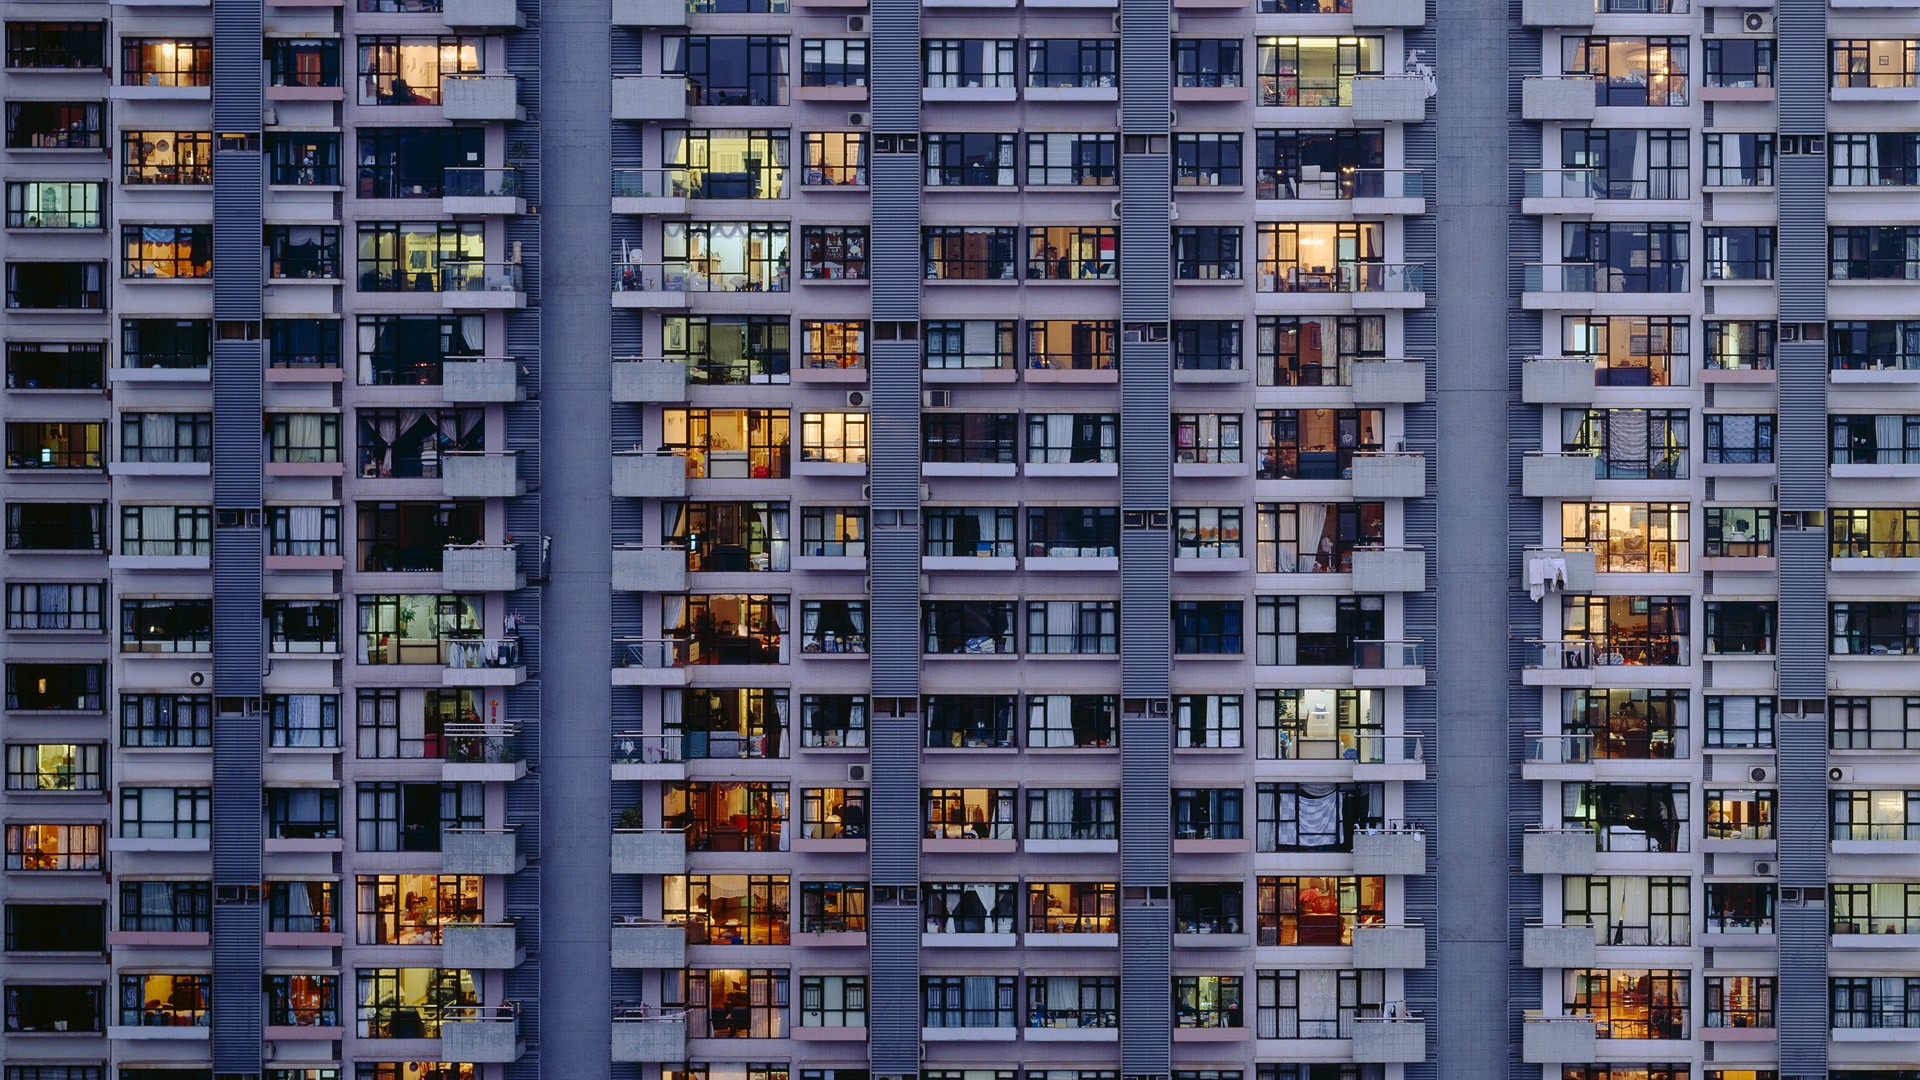 Artistic Hd Wallpaper - Cage Apartments In China , HD Wallpaper & Backgrounds